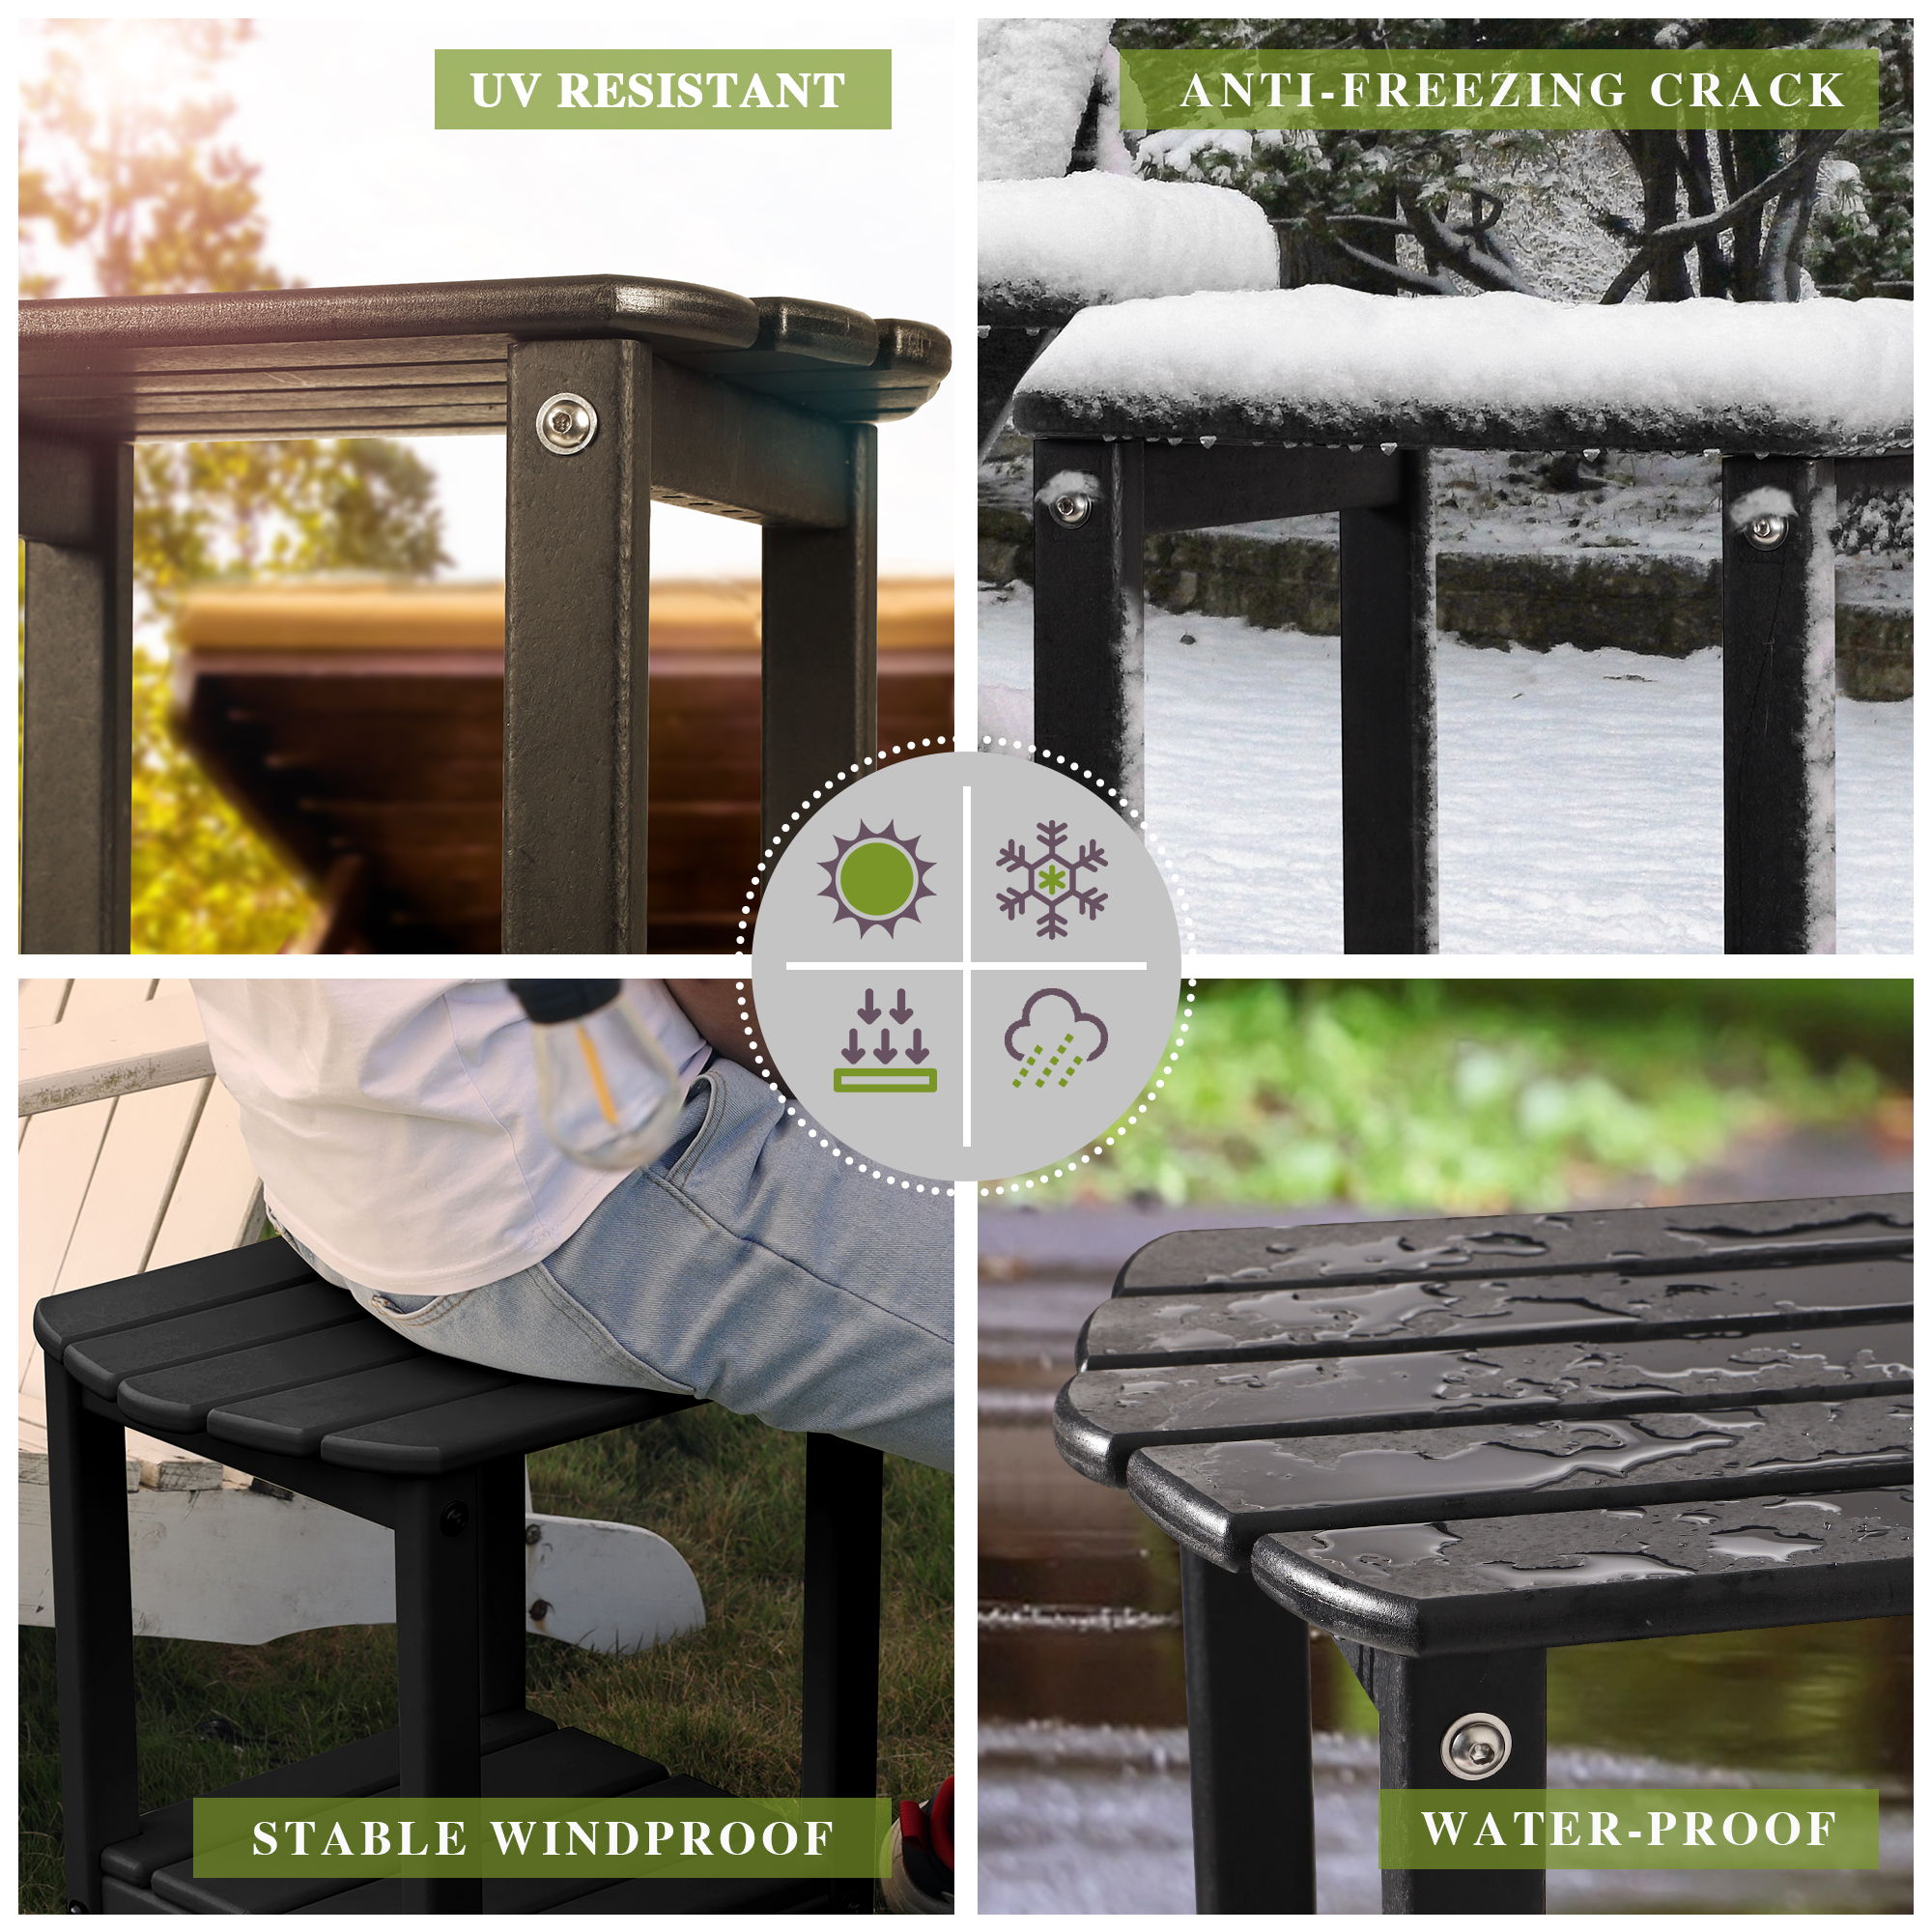 Scafild | Adirondack Side Table Plastic Outdoor End Tables with 2 Layer Storage, Coffee Table for Your Adirondack Chair, Patio Deck Garden, Backyard & Lawn Furniture - Black - image 3 of 8